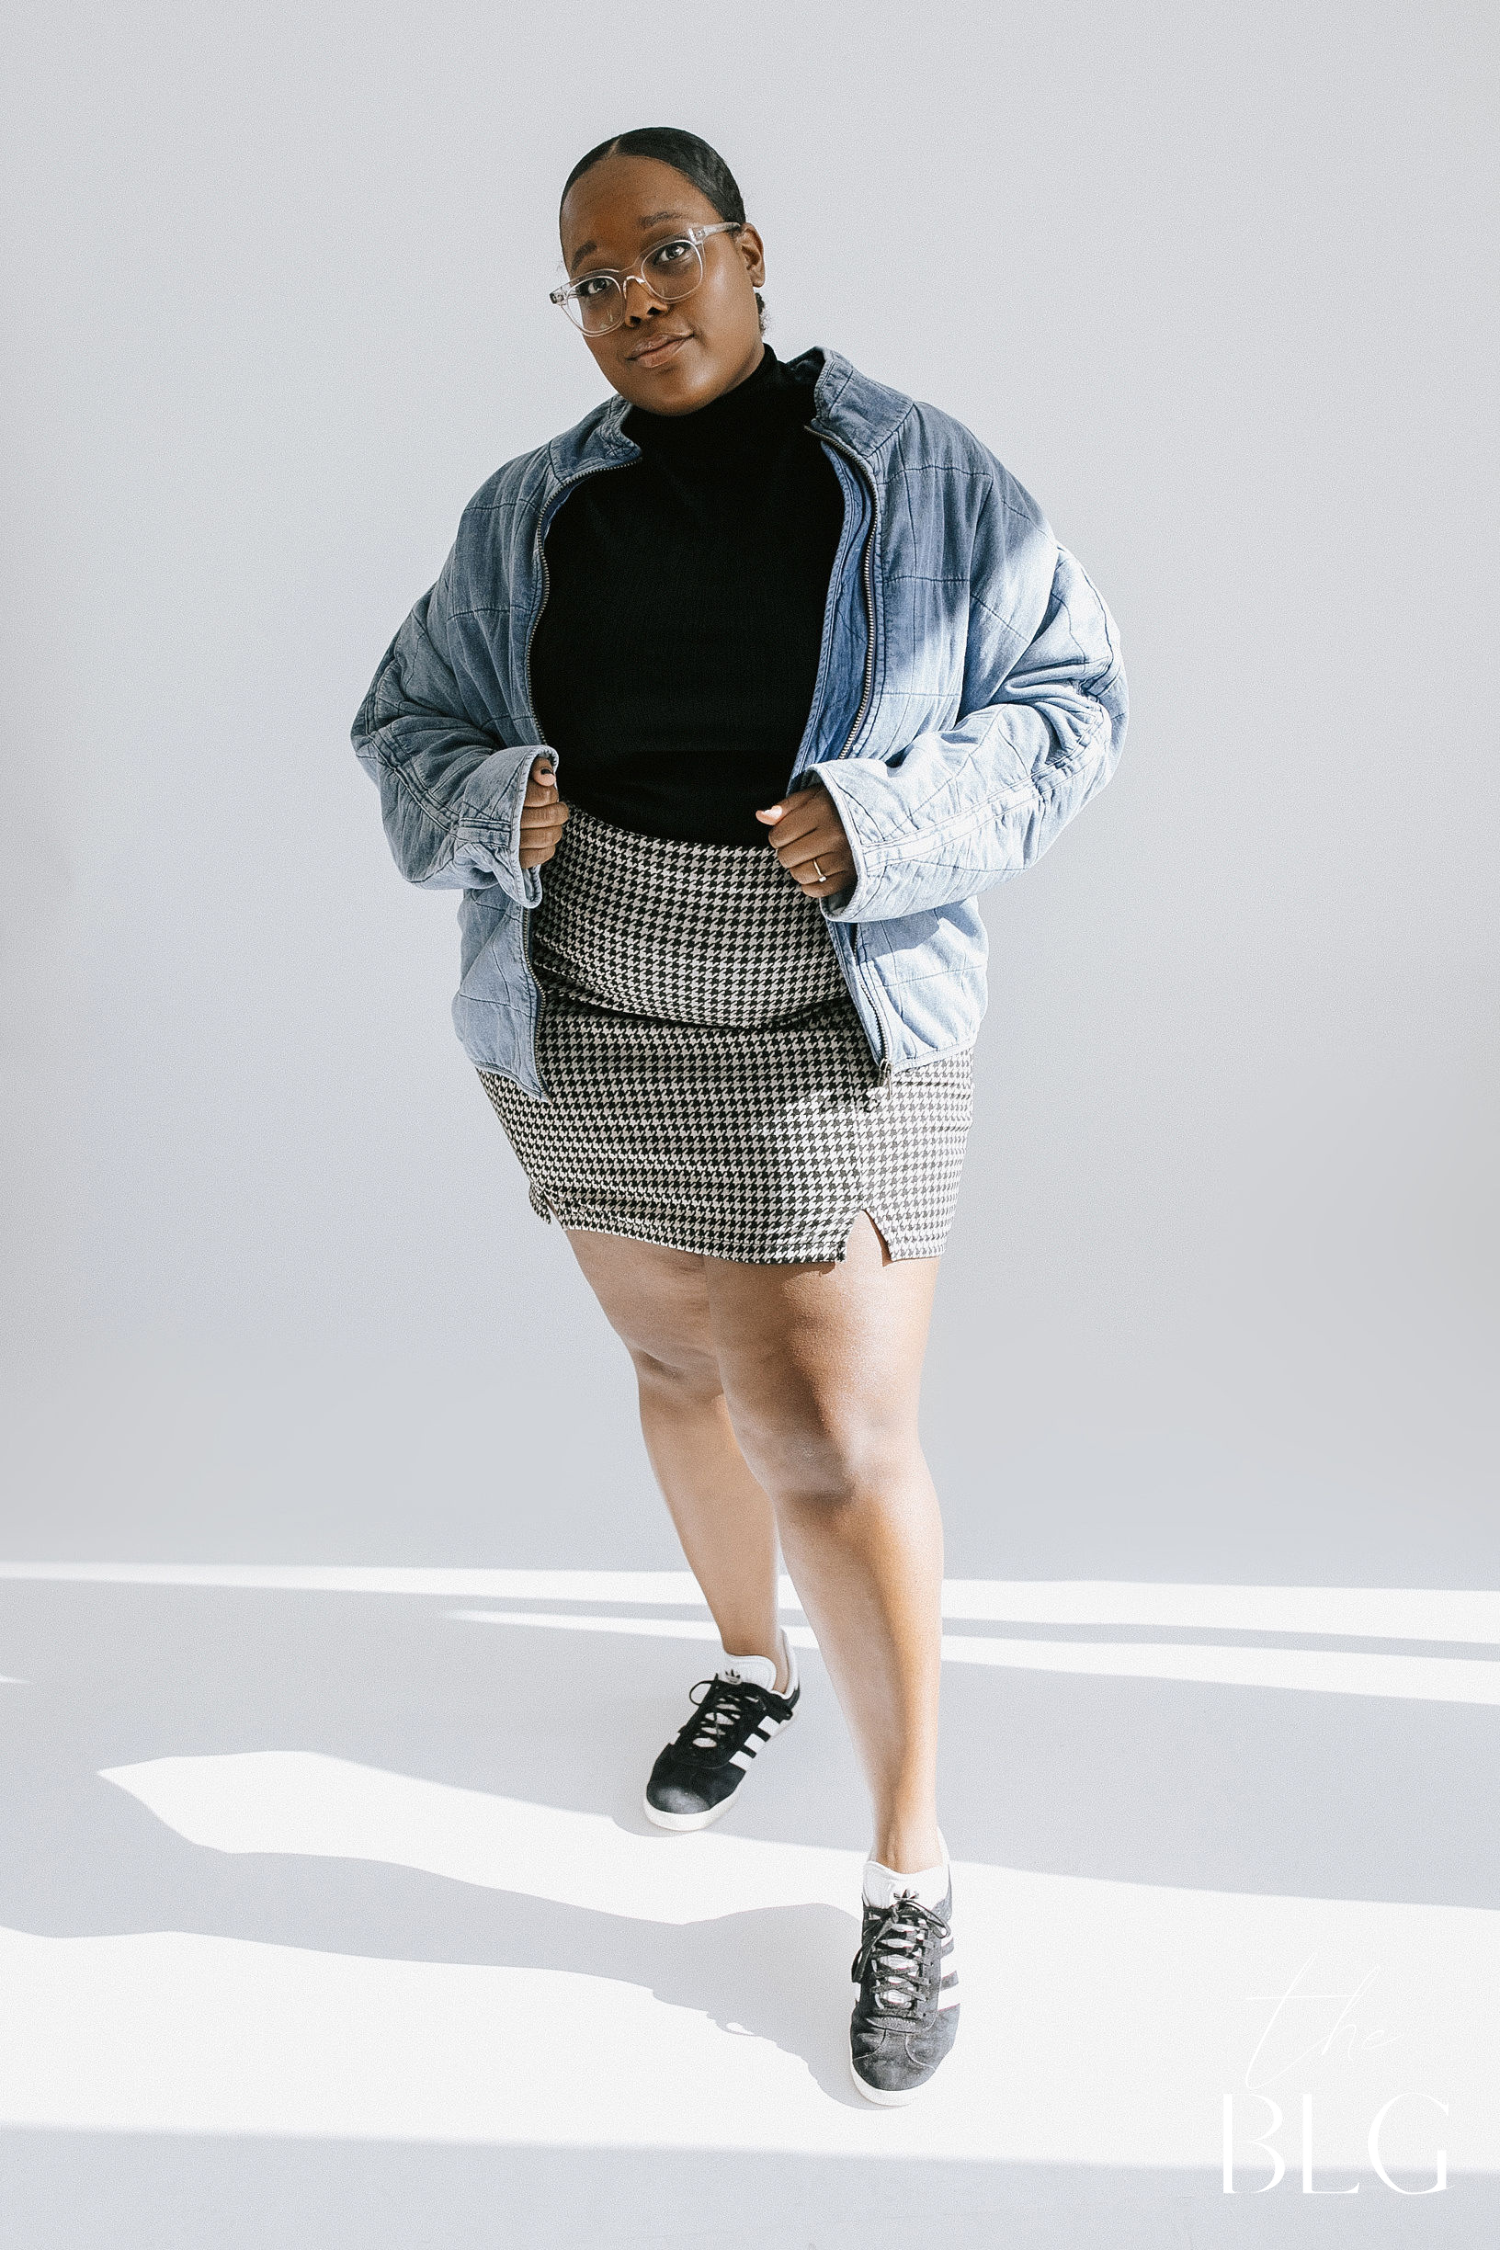 Model wearing a skirt and sneakers